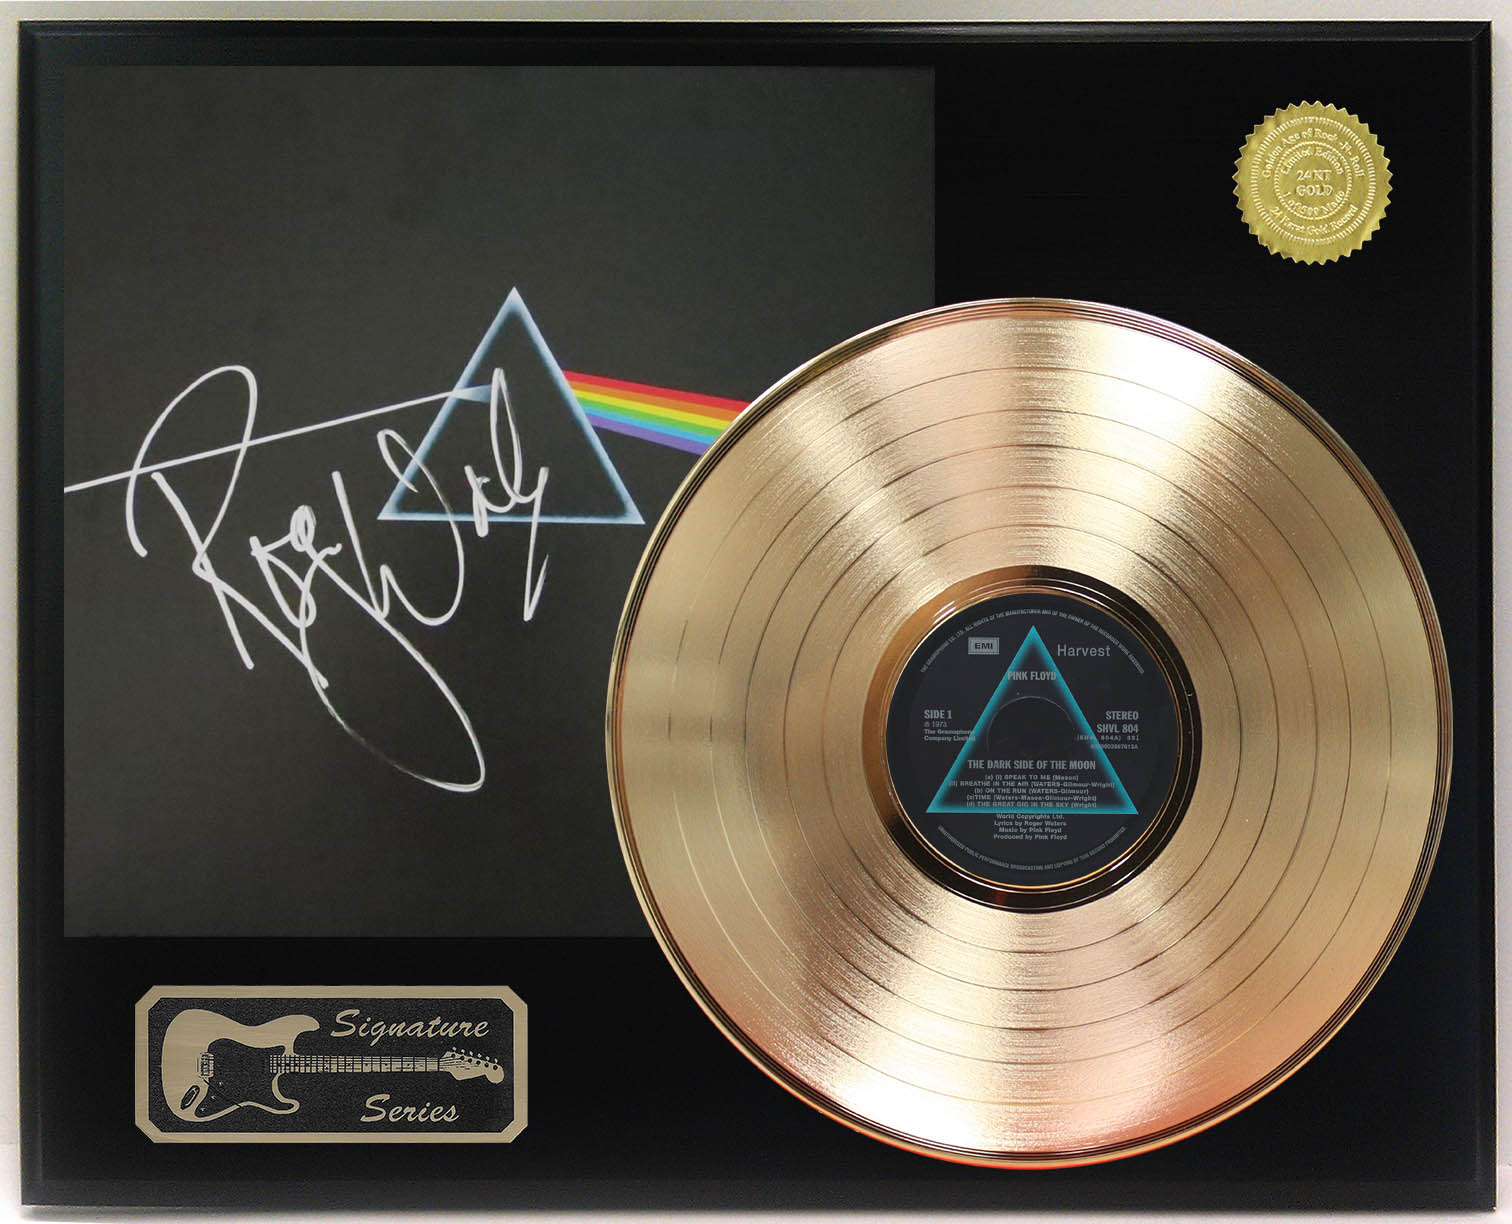 Pink Floyd Ltd Edition Reproduction Signature Gold LP Record Display - Gold  Record Outlet Album and Disc Collectible Memorabilia